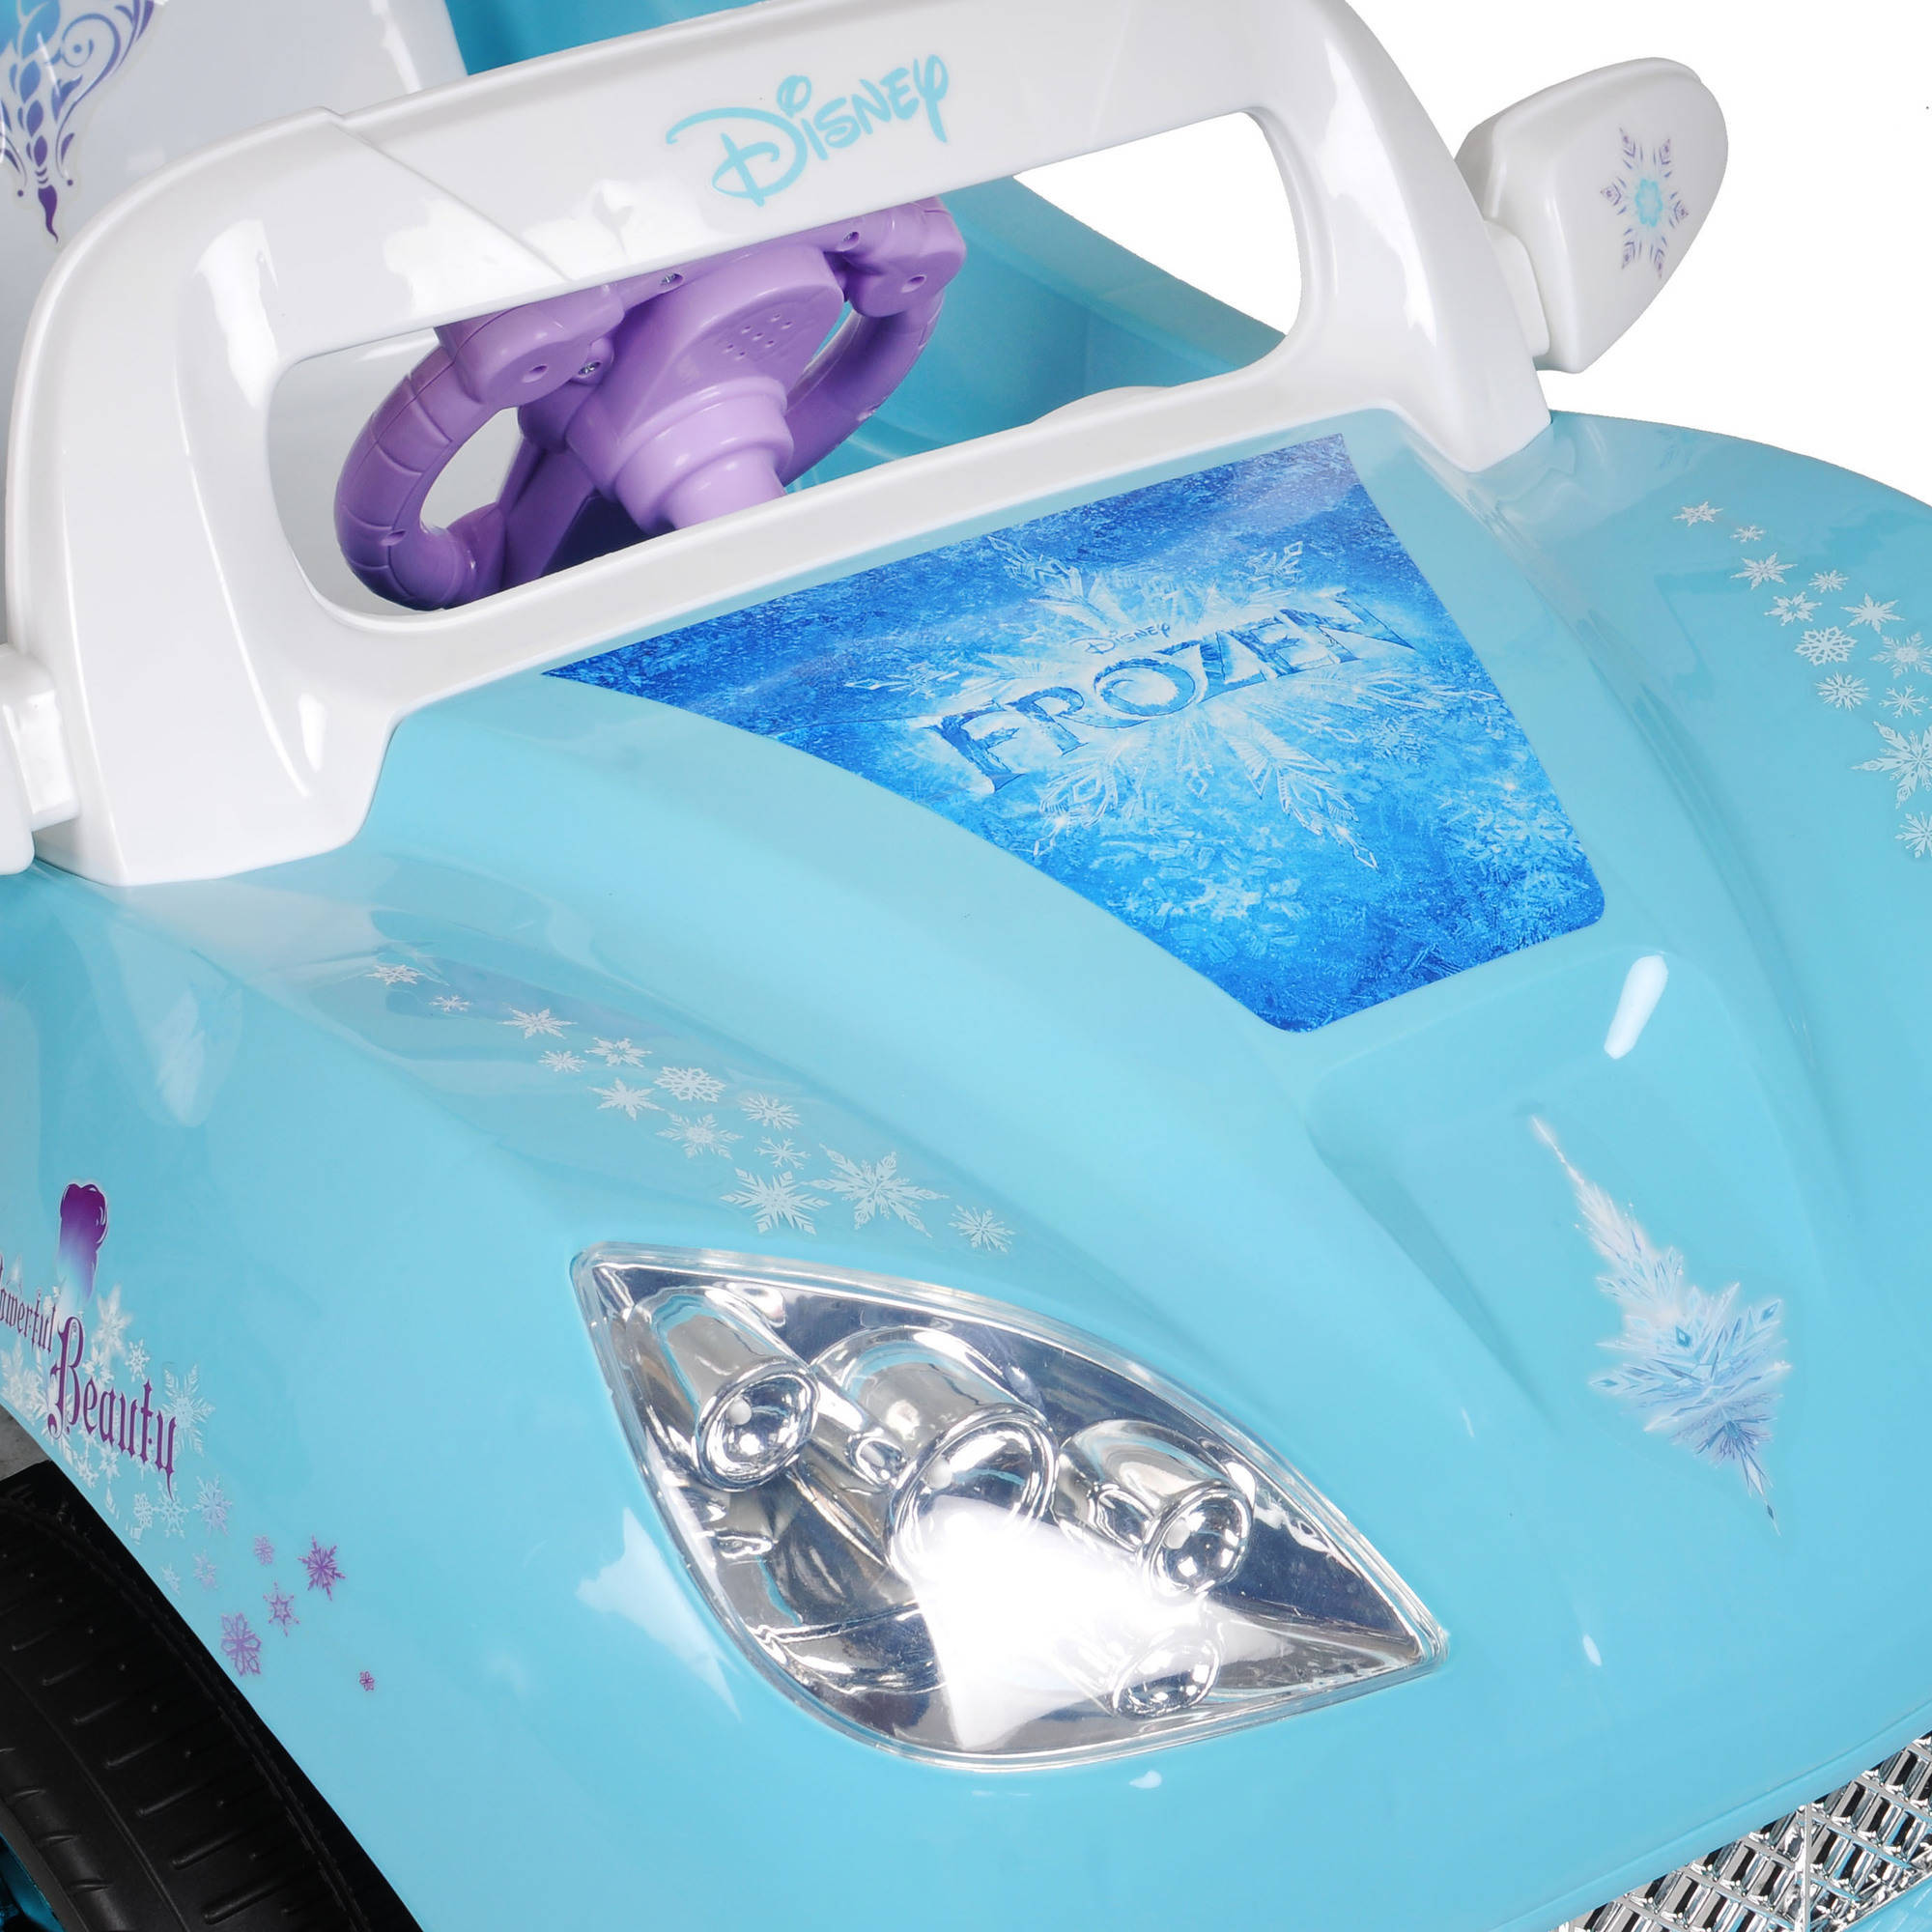 Disney Frozen Convertible Car 6-Volt Battery-Powered Ride-On - image 5 of 7